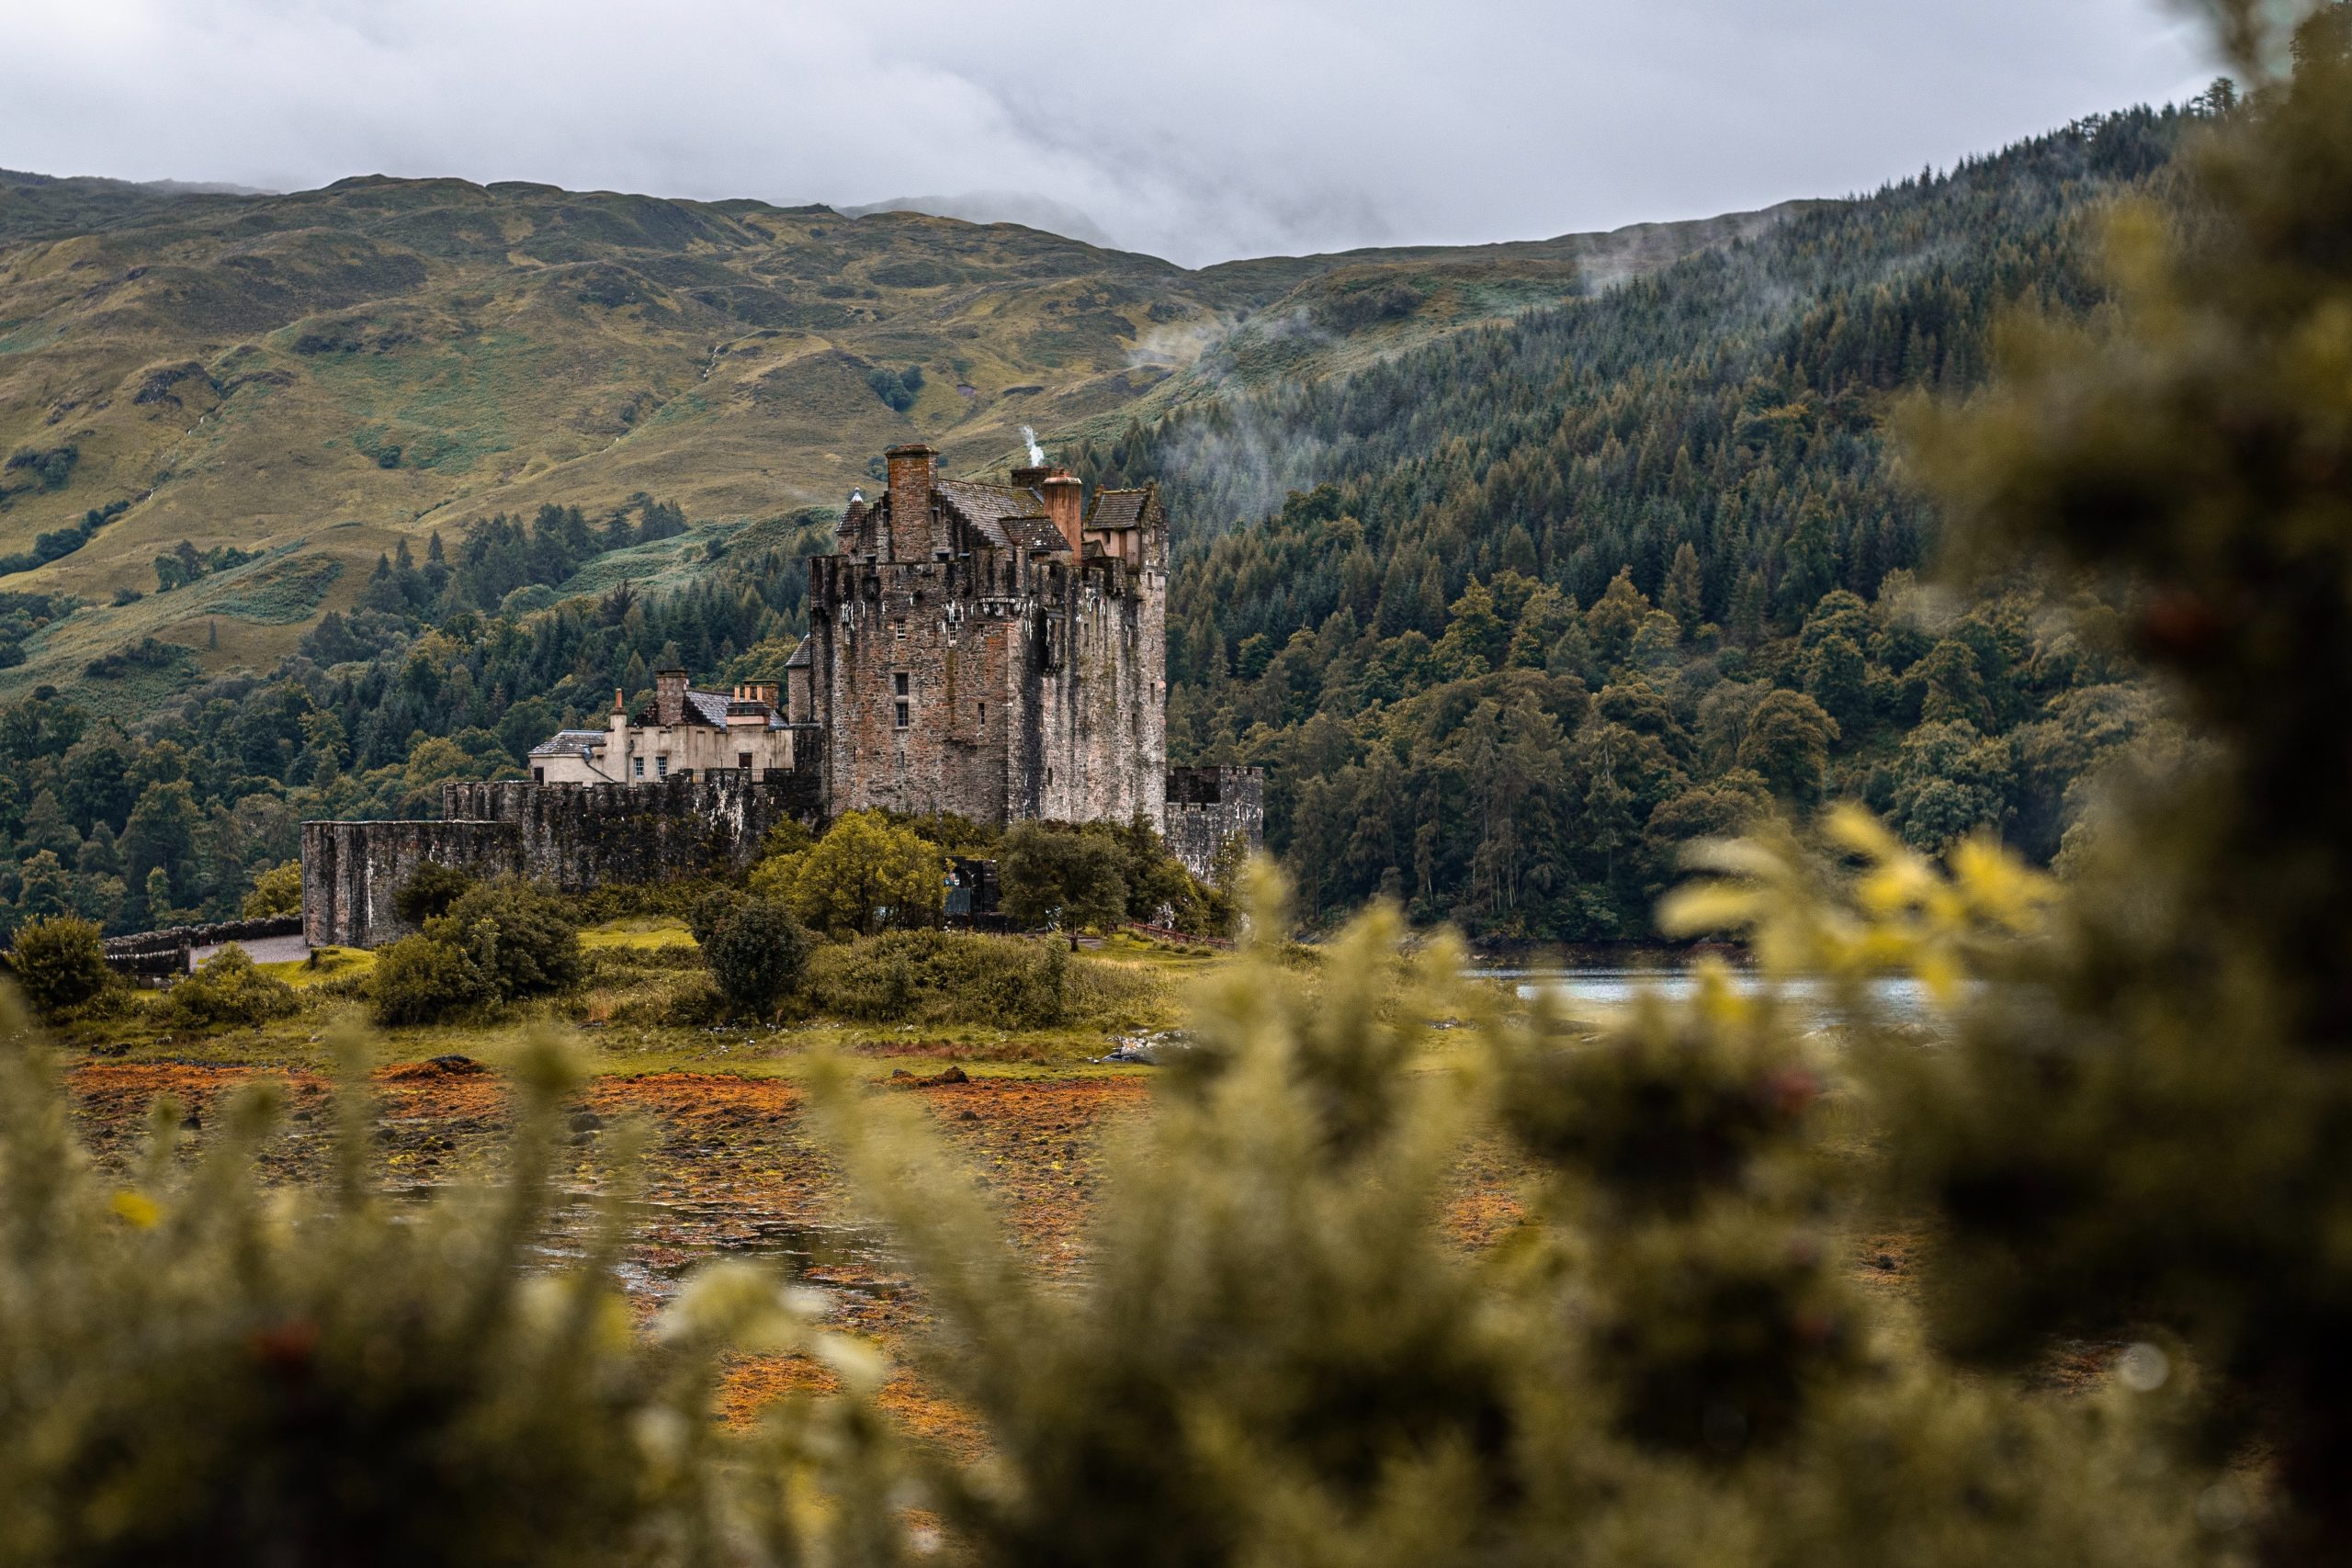 A castle in a clearing in front of the wooded hills of the Scottish highlands.